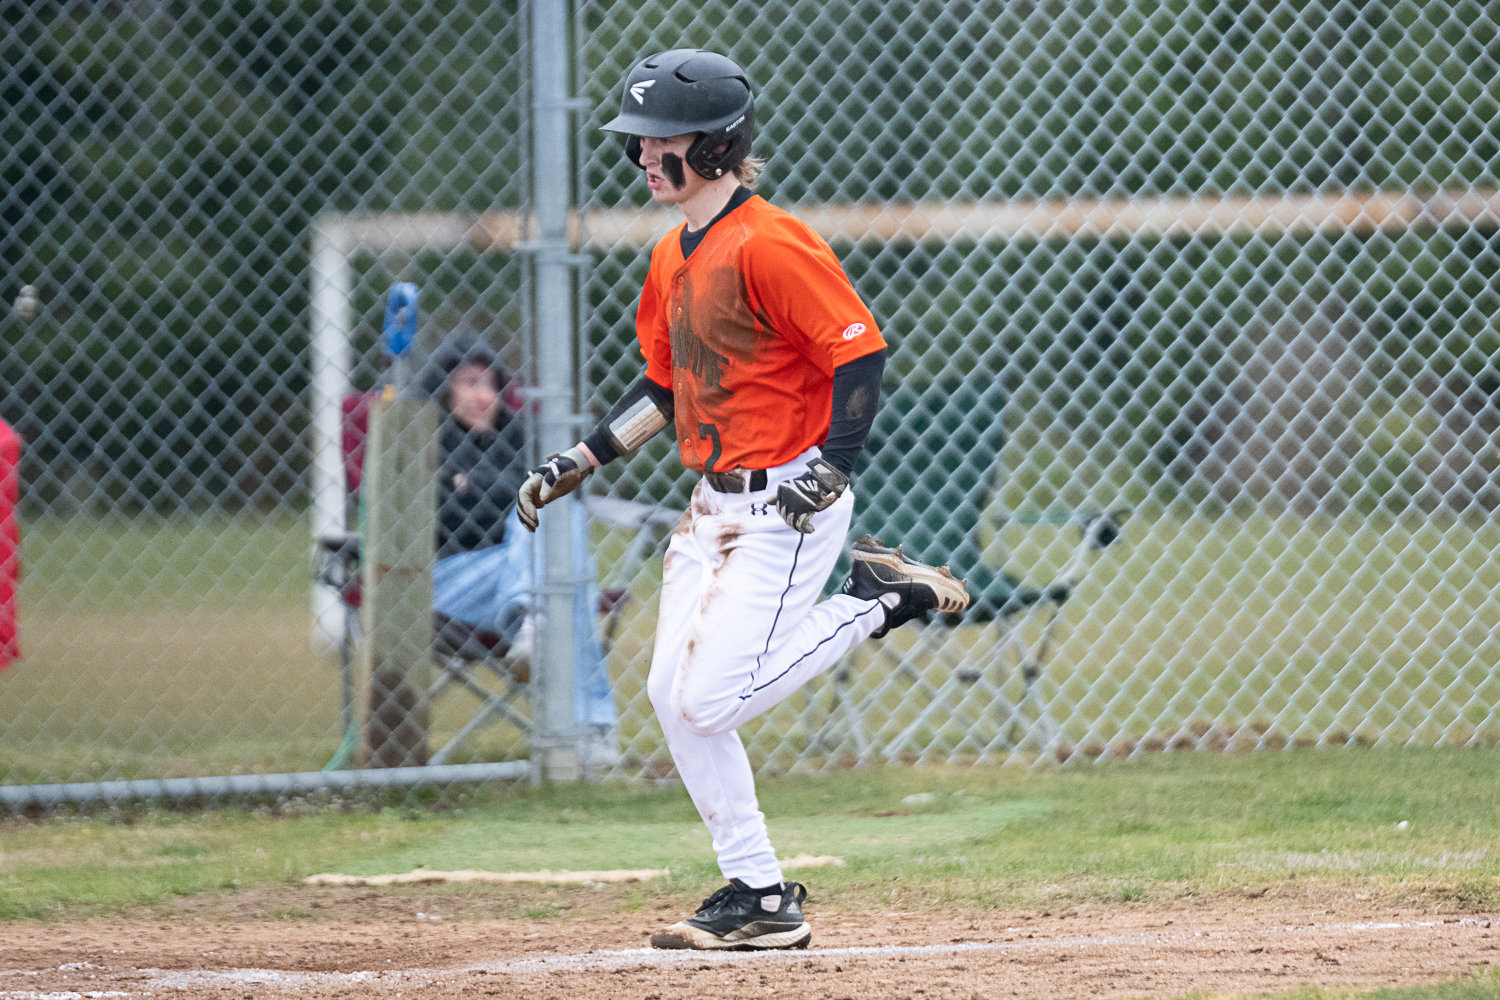 Lane Mitchell comes in to score Napavine's first run in the Tigers' 4-1 loss in the first game of their doubleheader against Toledo on March 20.